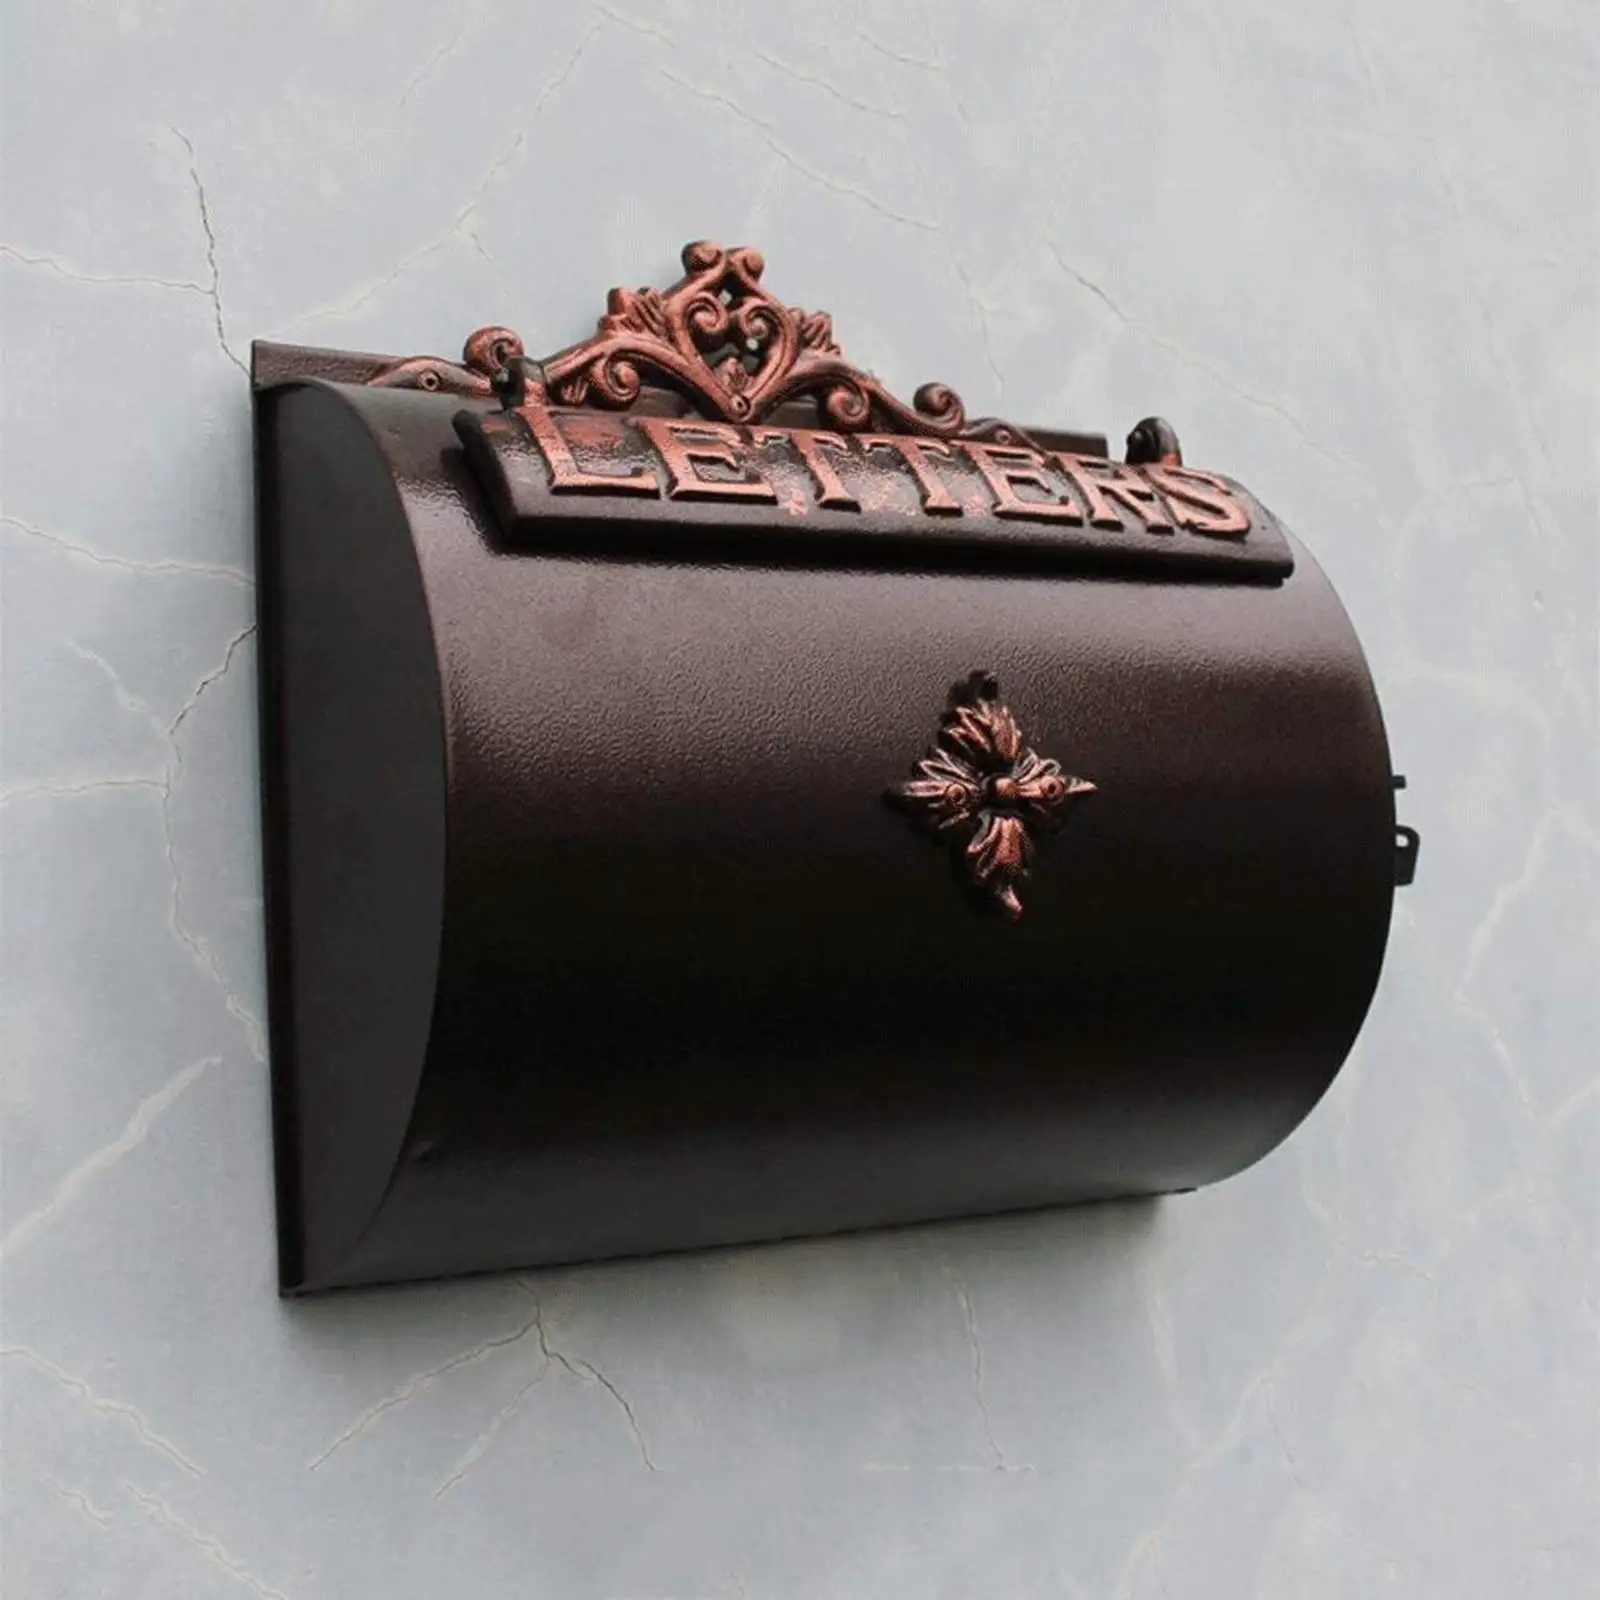 Metal Wall Mounted Mailbox Home Postbox with Key Lock Decorative Lock Mailbox Pastoral Retro Letter Box